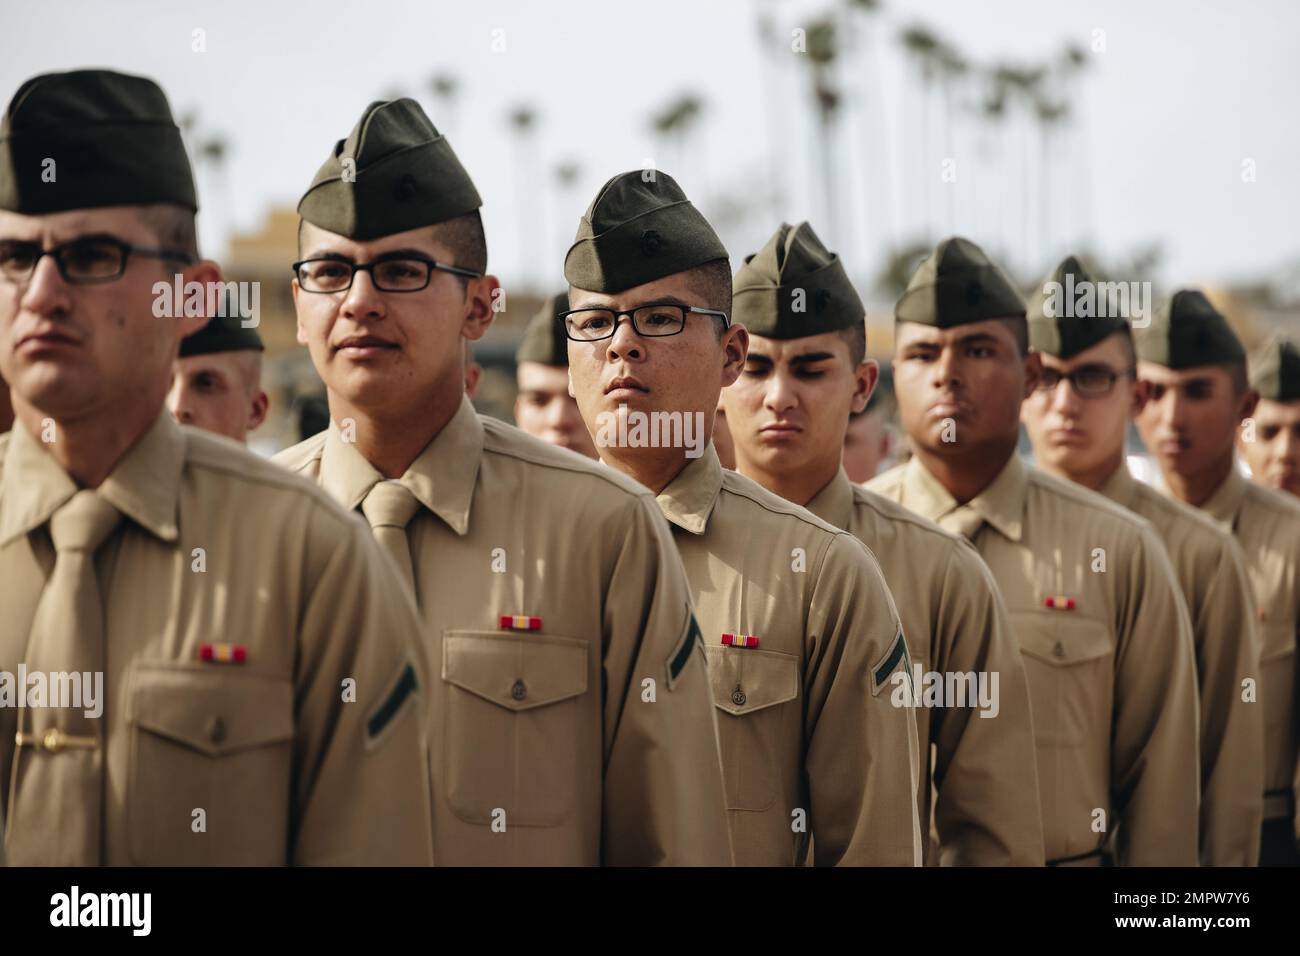 U.S. Marine Corps Pfc. Simon Tam, a new Marine with Mike Company, 3rd Recruit Training Battalion, stands in formation during family day at Marine Corps Recruit Depot San Diego, November 17, 2022. Pfc. Tam is a native of San Francisco, California and was recruited out of Recruiting Station San Francisco by Staff Sgt. Arthur Chou. Stock Photo